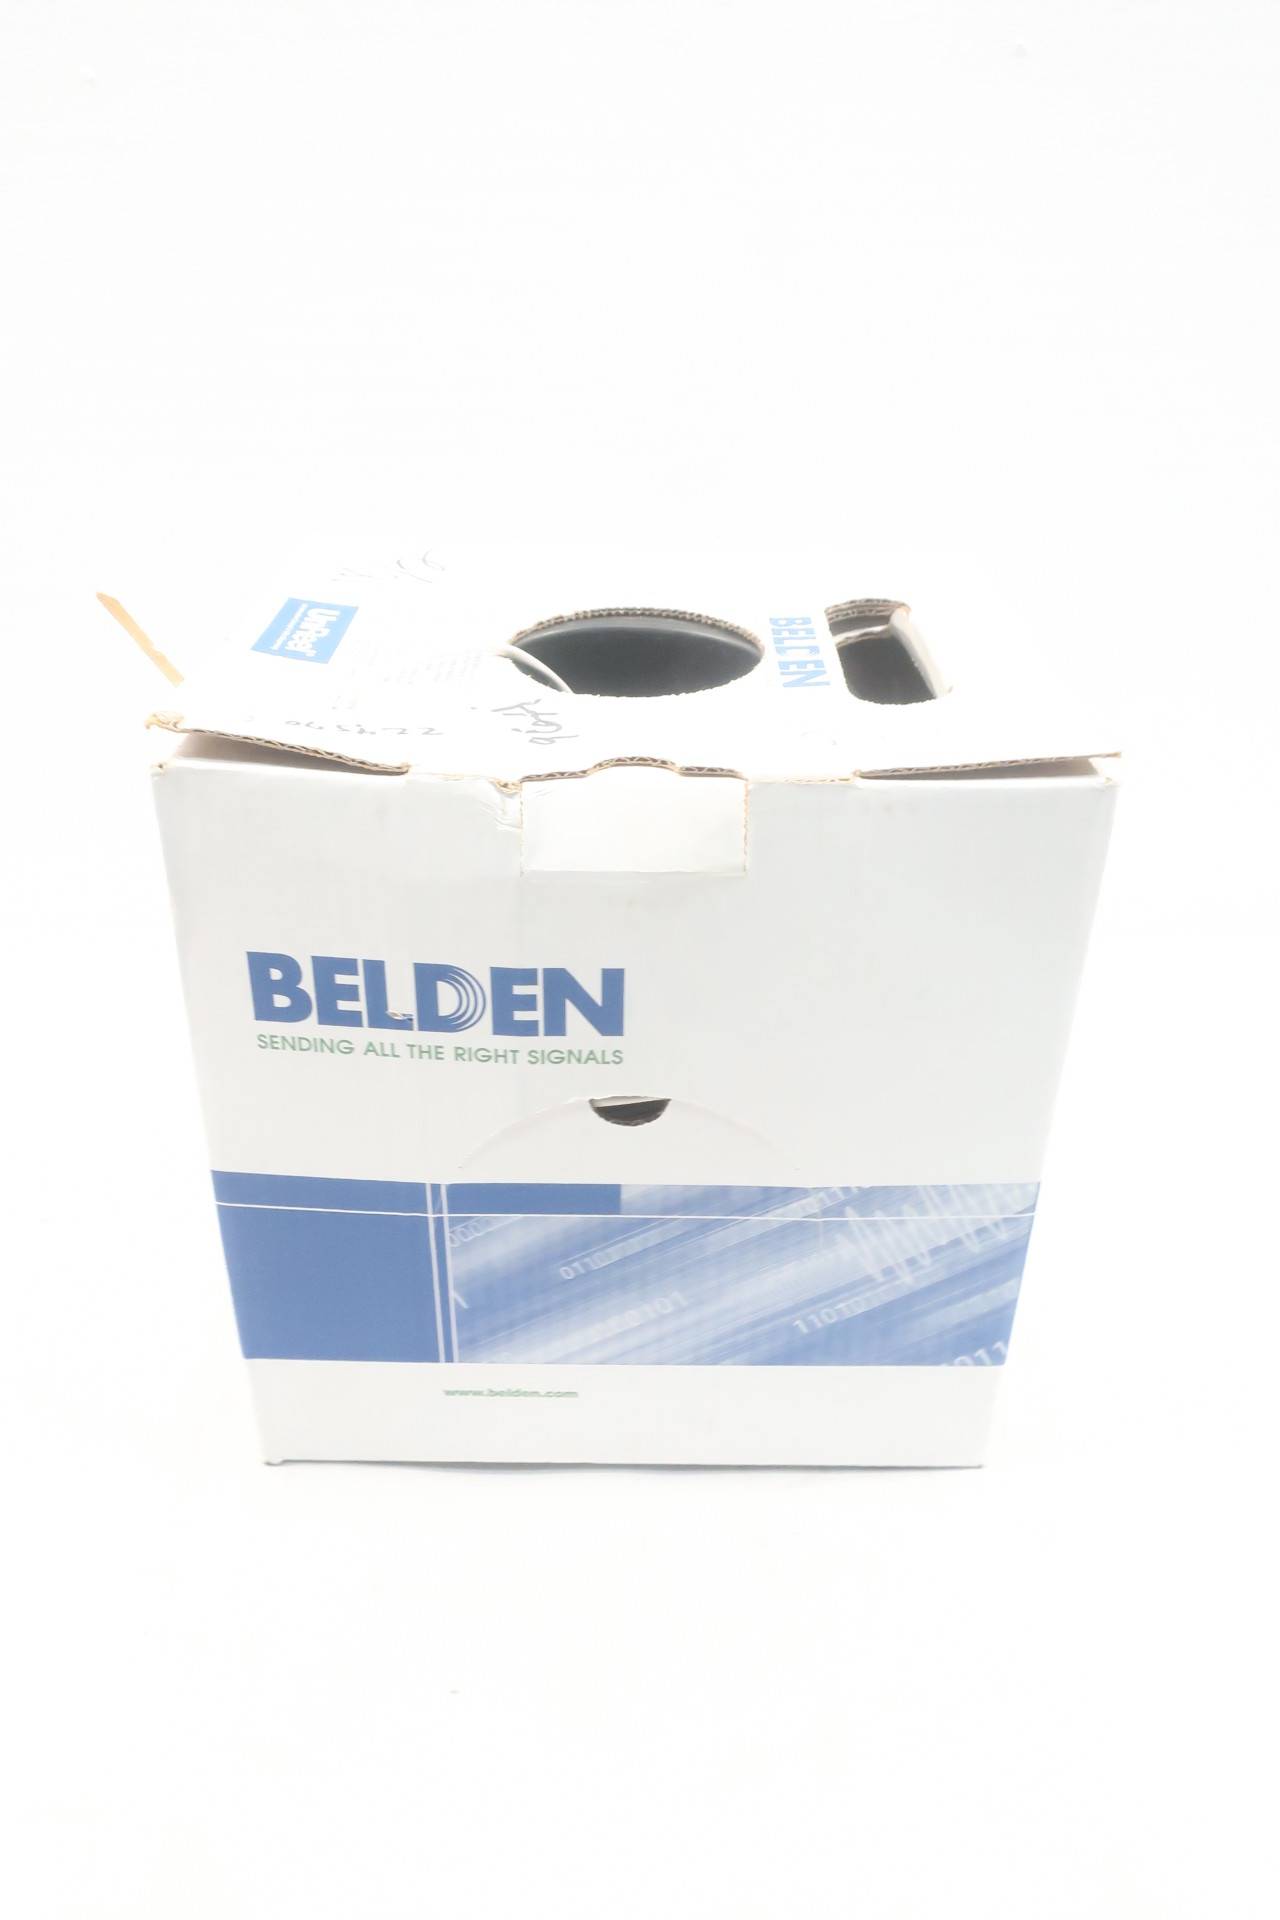 BELDEN 6300FE 877 Cable 2C 18AWG 185FT 